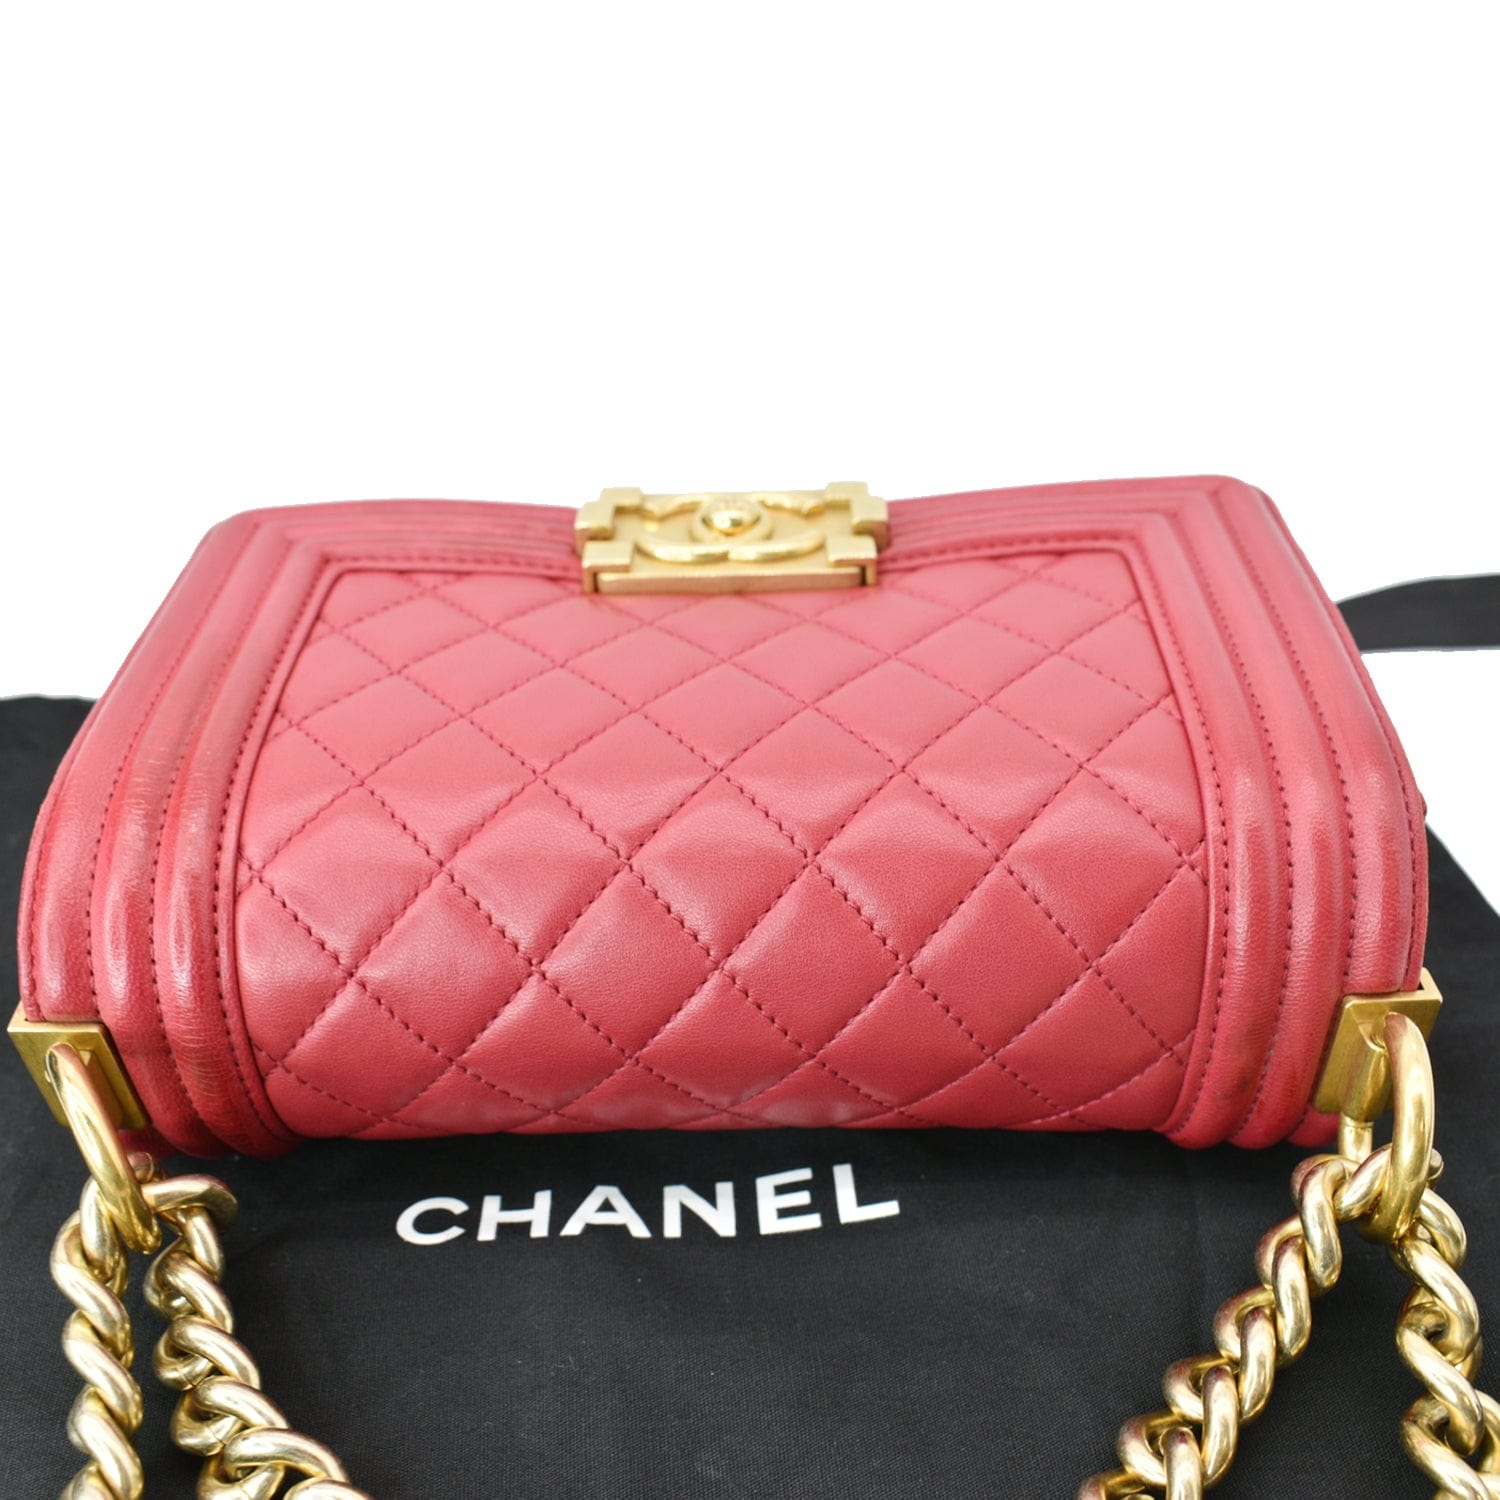 Chanel Pink Small Classic Le Boy Flap Bag Chanel